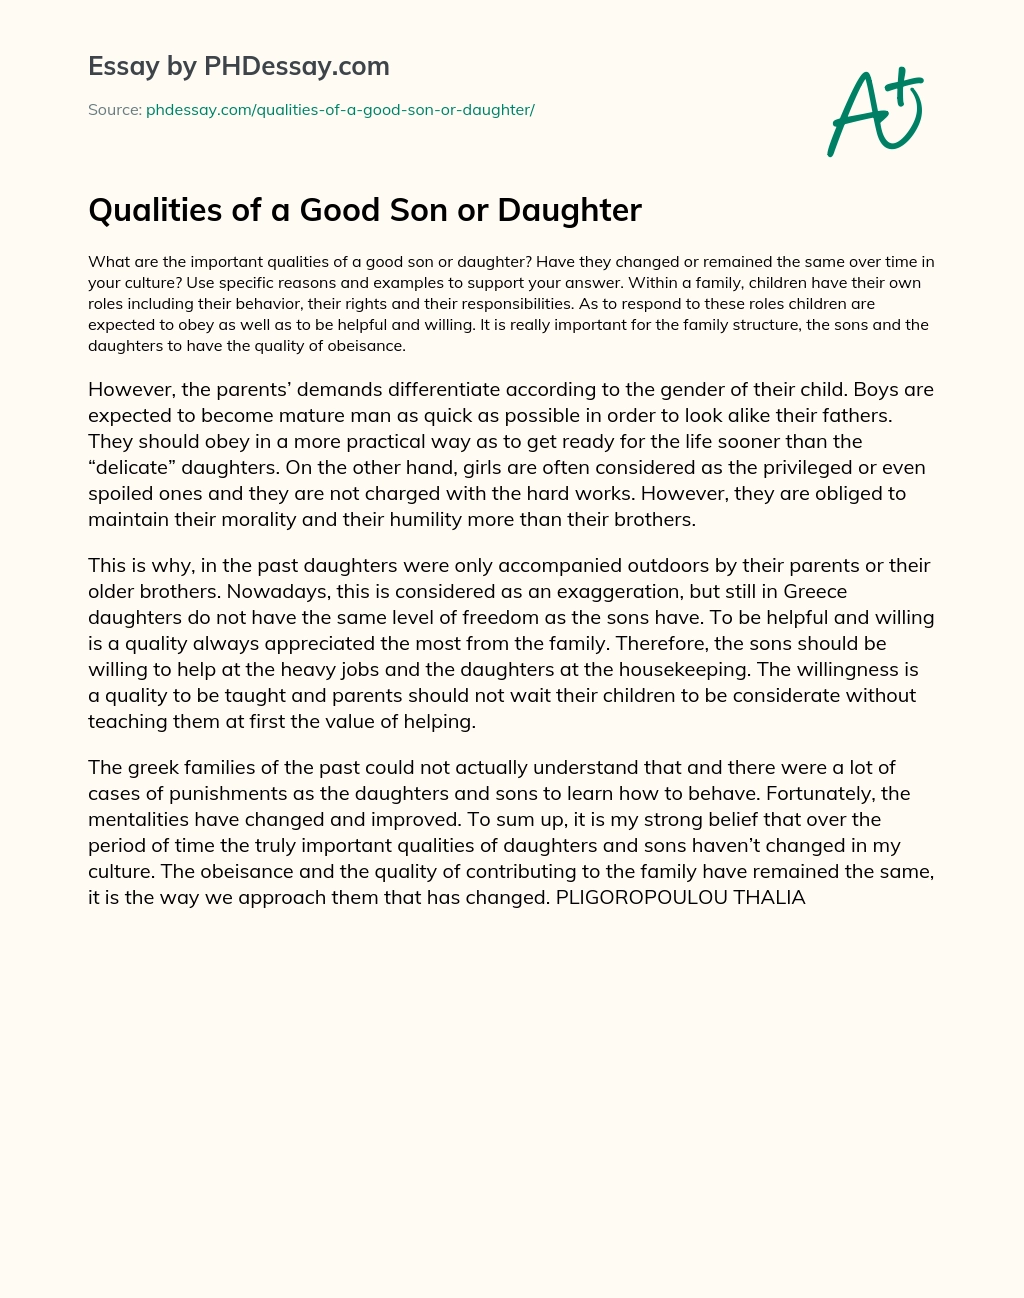 Qualities of a Good Son or Daughter essay